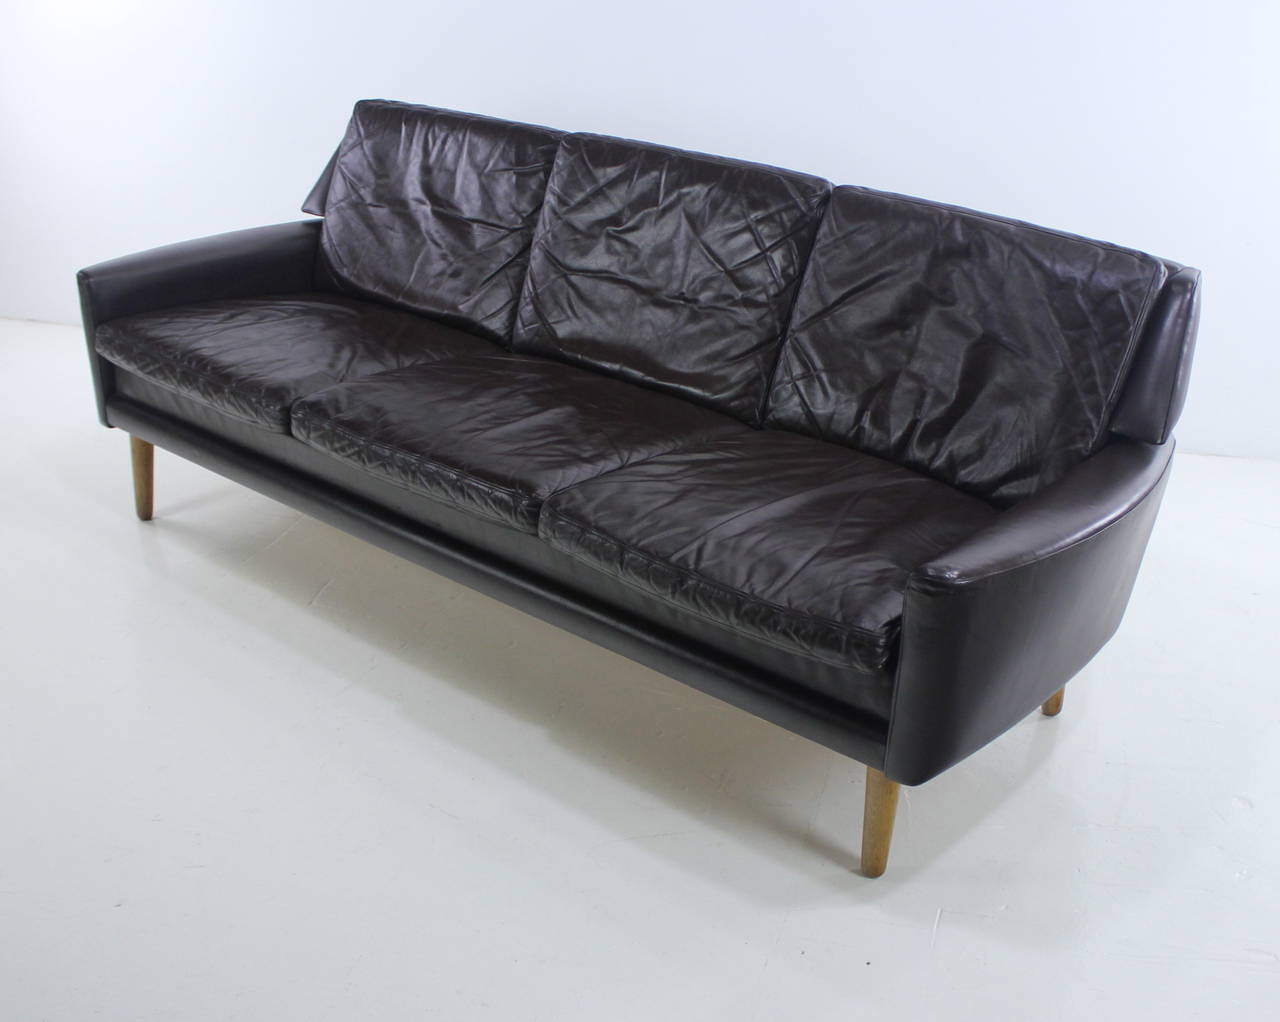 Danish Modern Leather Sofa Designed by Erik Worts In Excellent Condition For Sale In Portland, OR